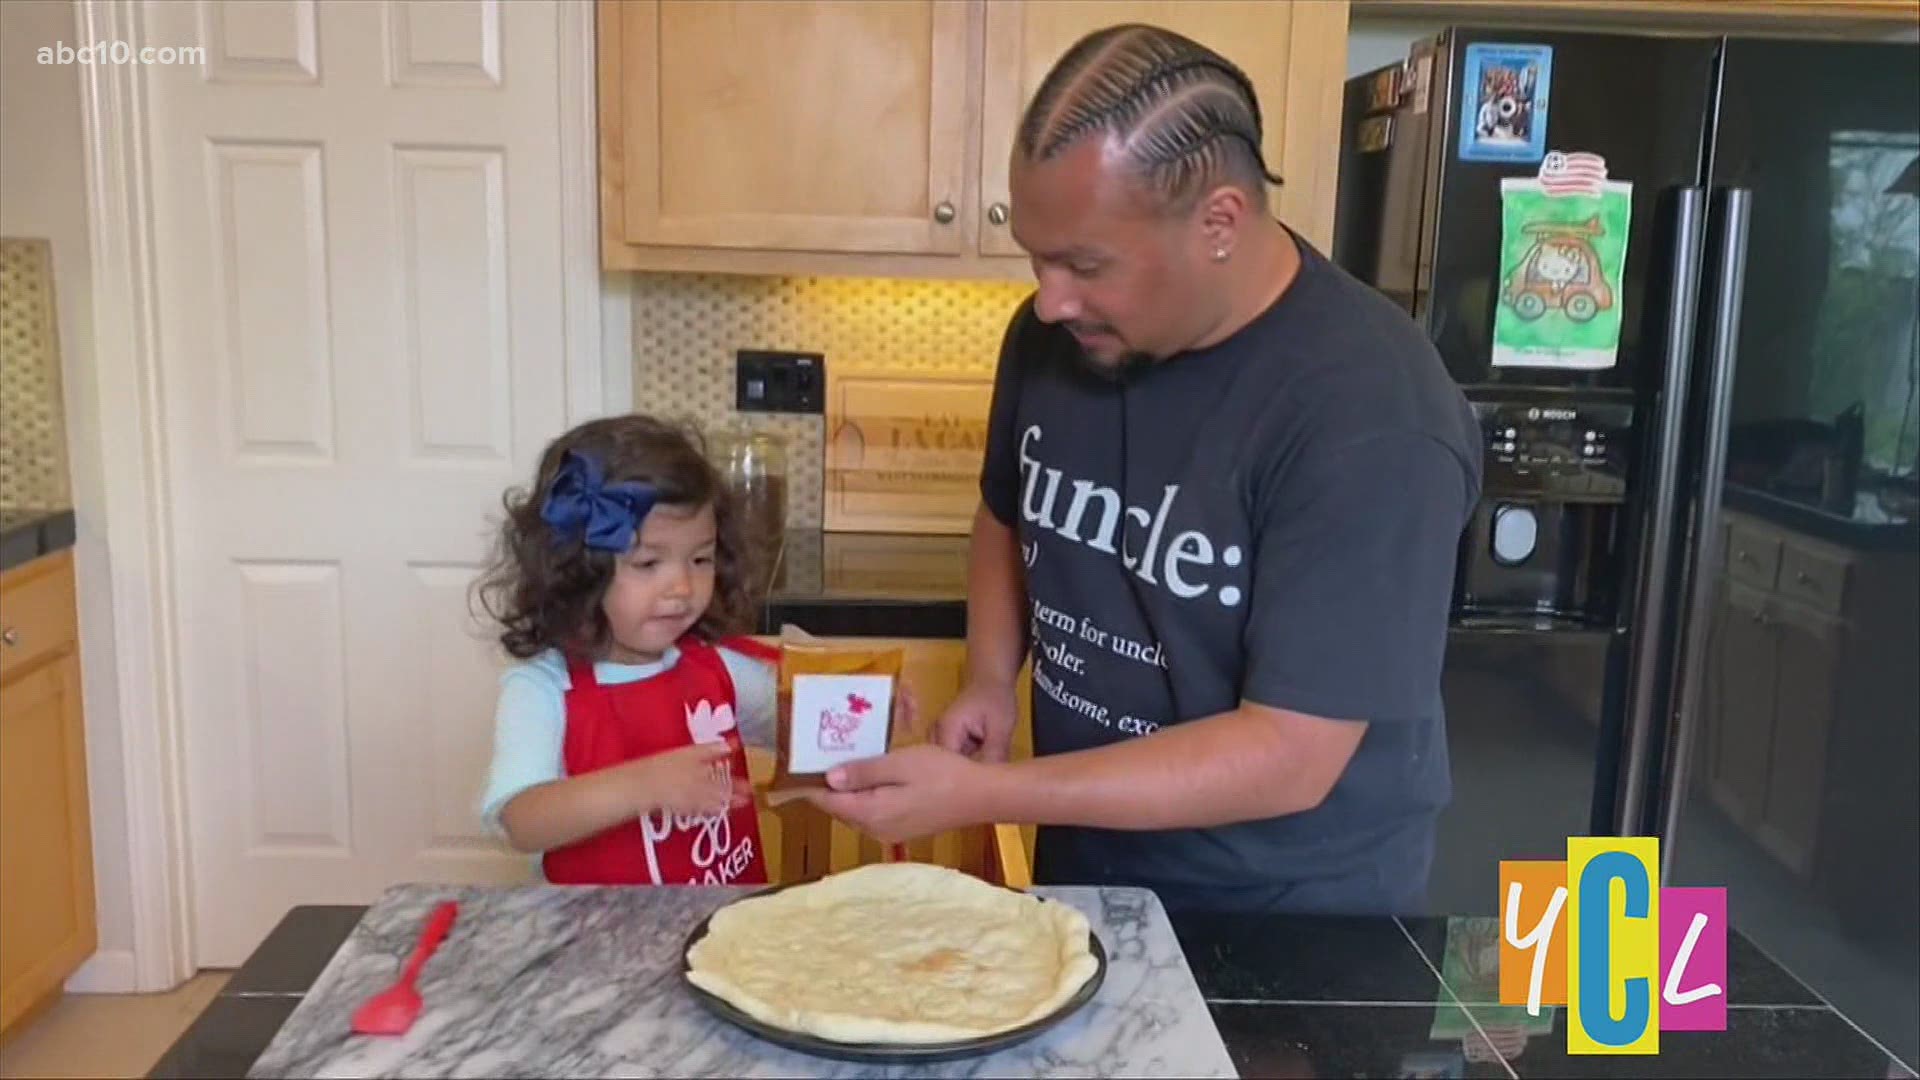 The dynamic duo are back at it making pizza! Fun Uncle Julian and his niece show us how to get down and doughy! It may be cheesy, but this one will melt your heart!